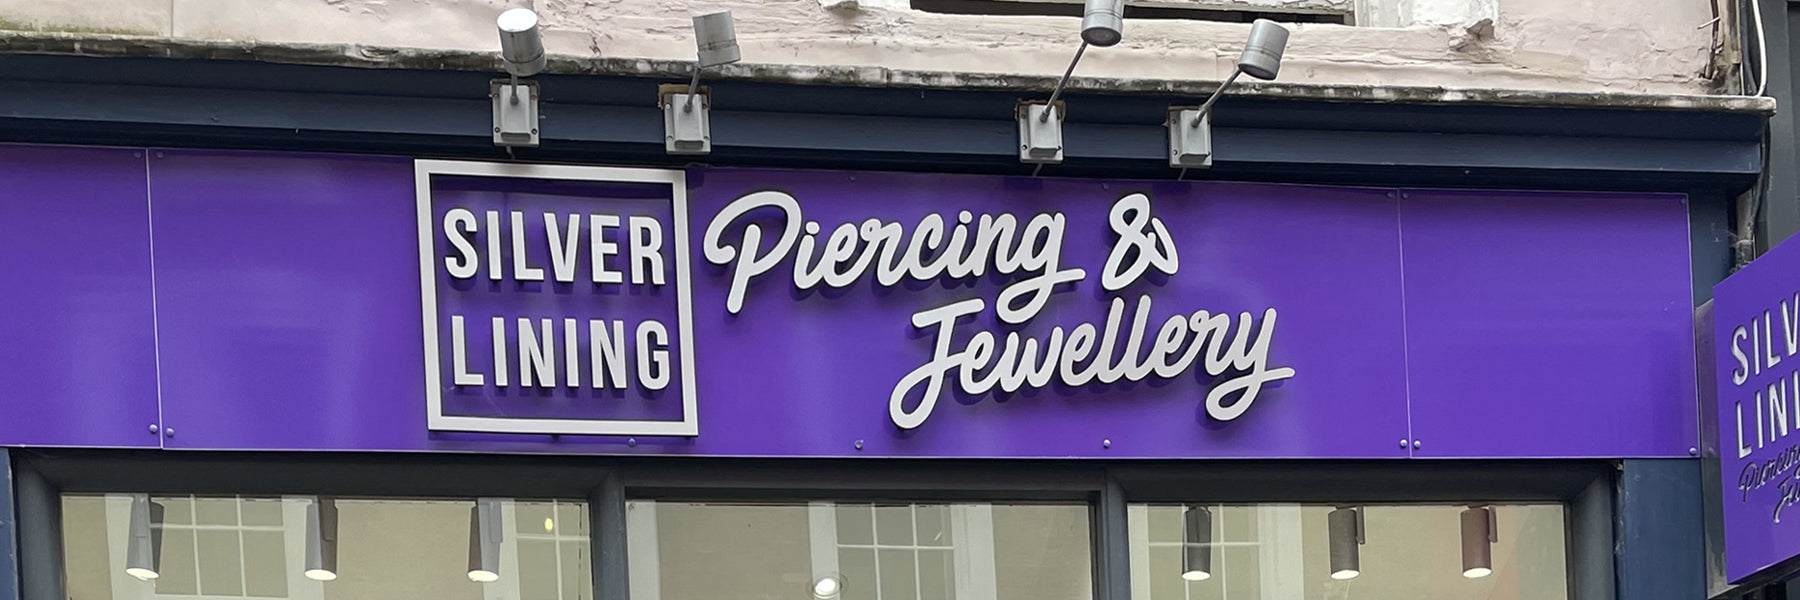 Silver Lining modern body piercing specialists storefront in Manchester